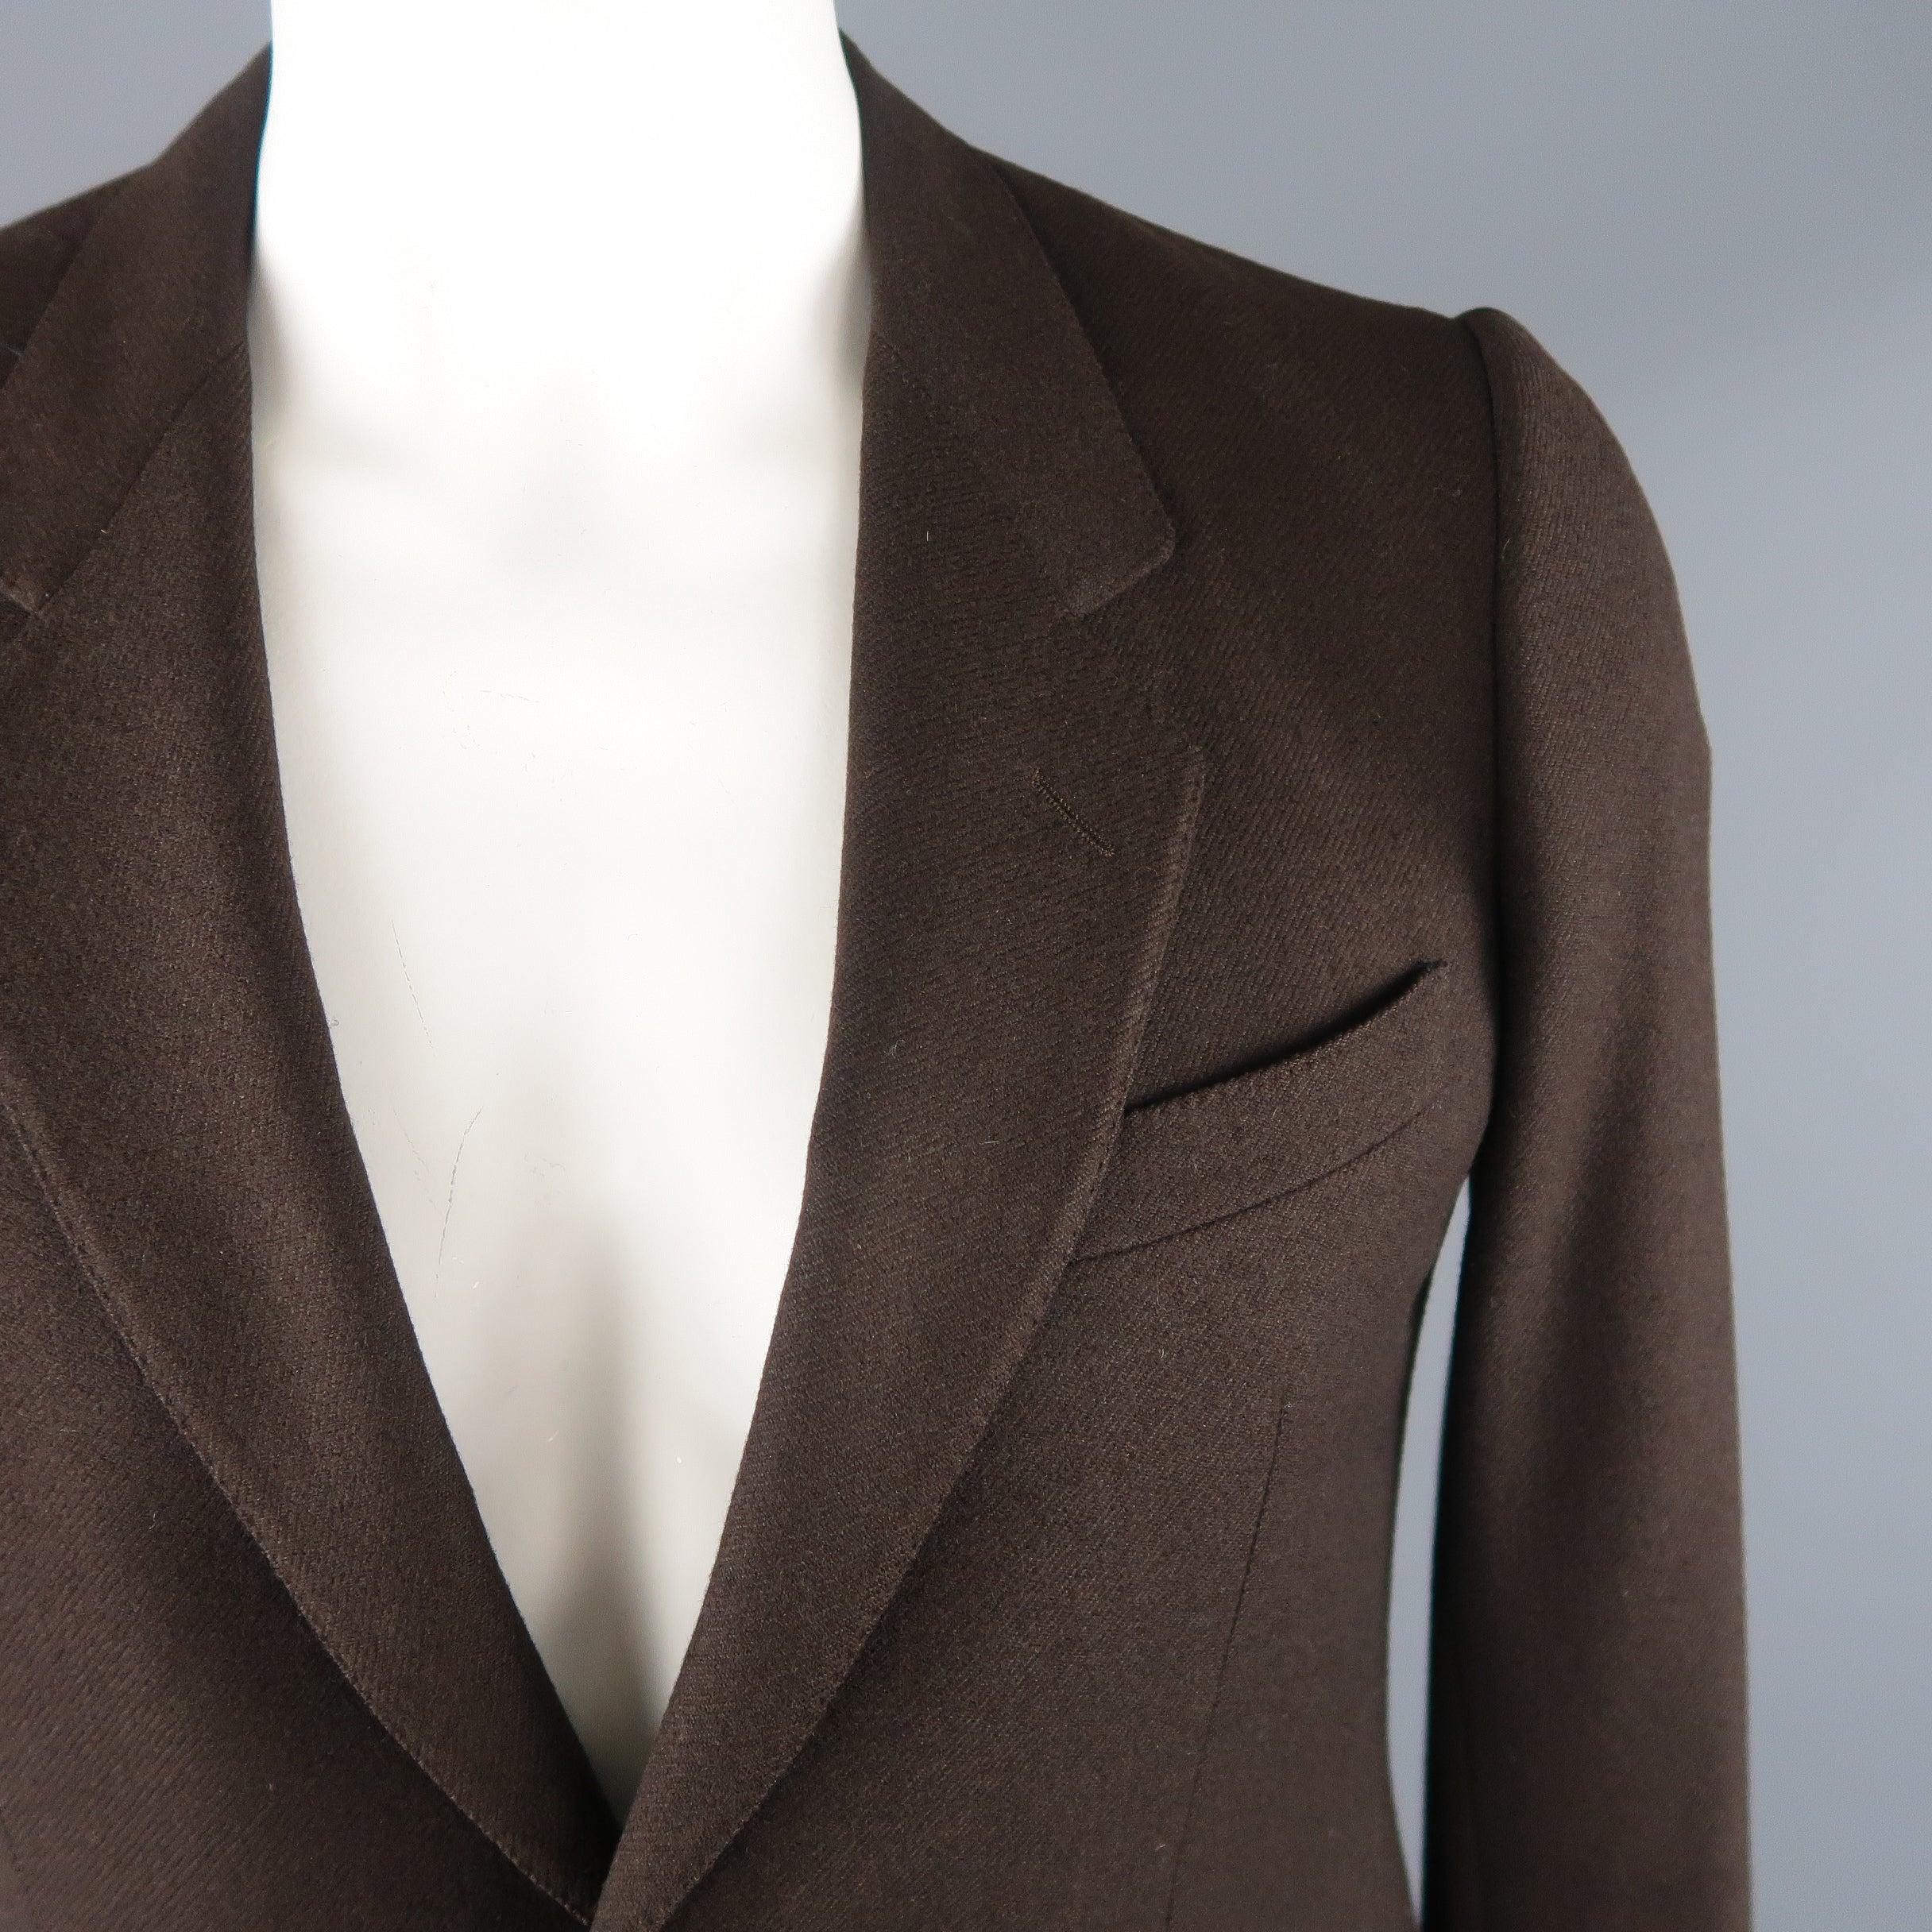 ERMENEGILDO ZEGNA classic sport coat comes in a brown tone in a solid wool / cashmere material, with a notch lapel, slit and flap pockets, 2 buttons closure, single breasted with a single vent at back. Very light discoloration at lining. Made in